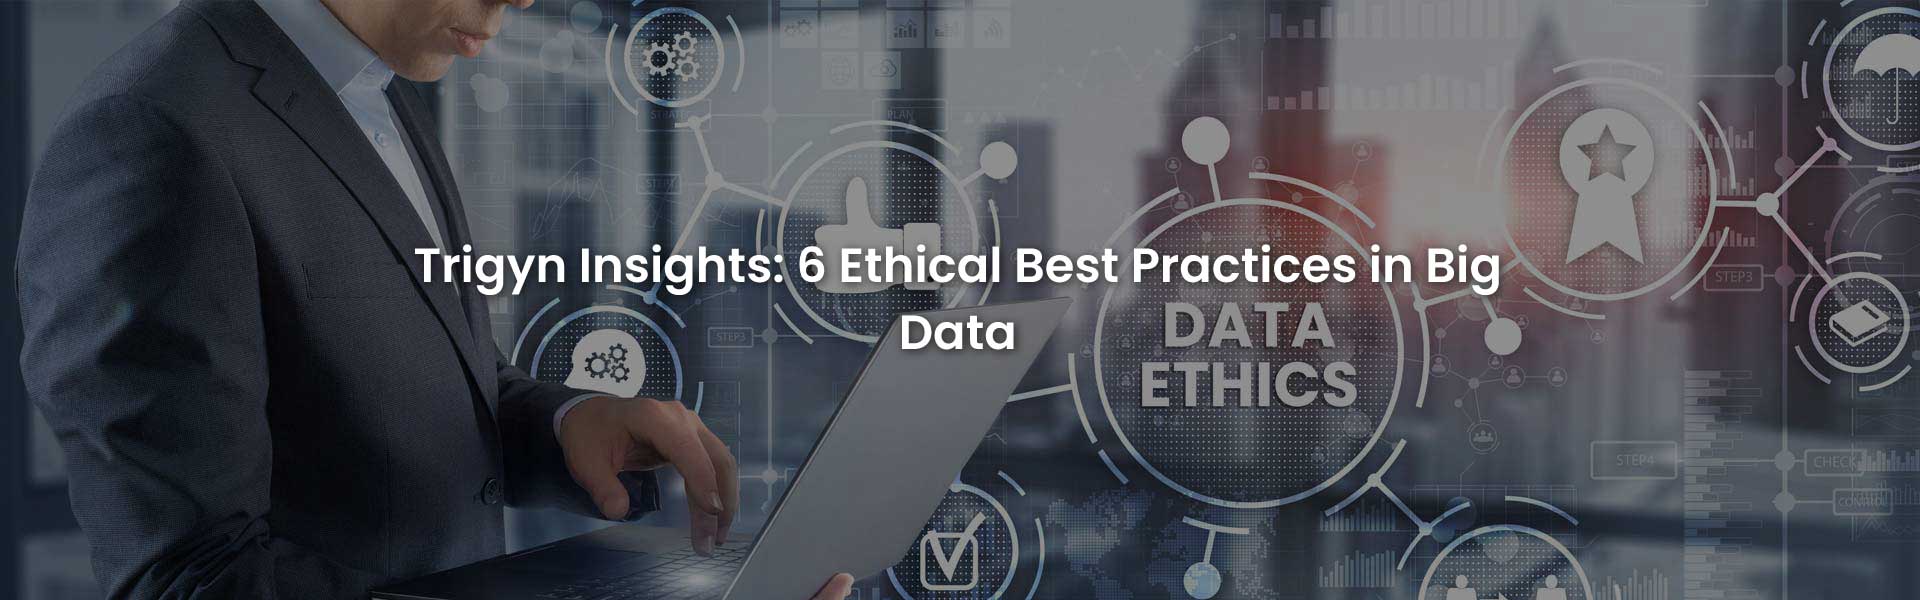 Ethical Big Data Best Practices